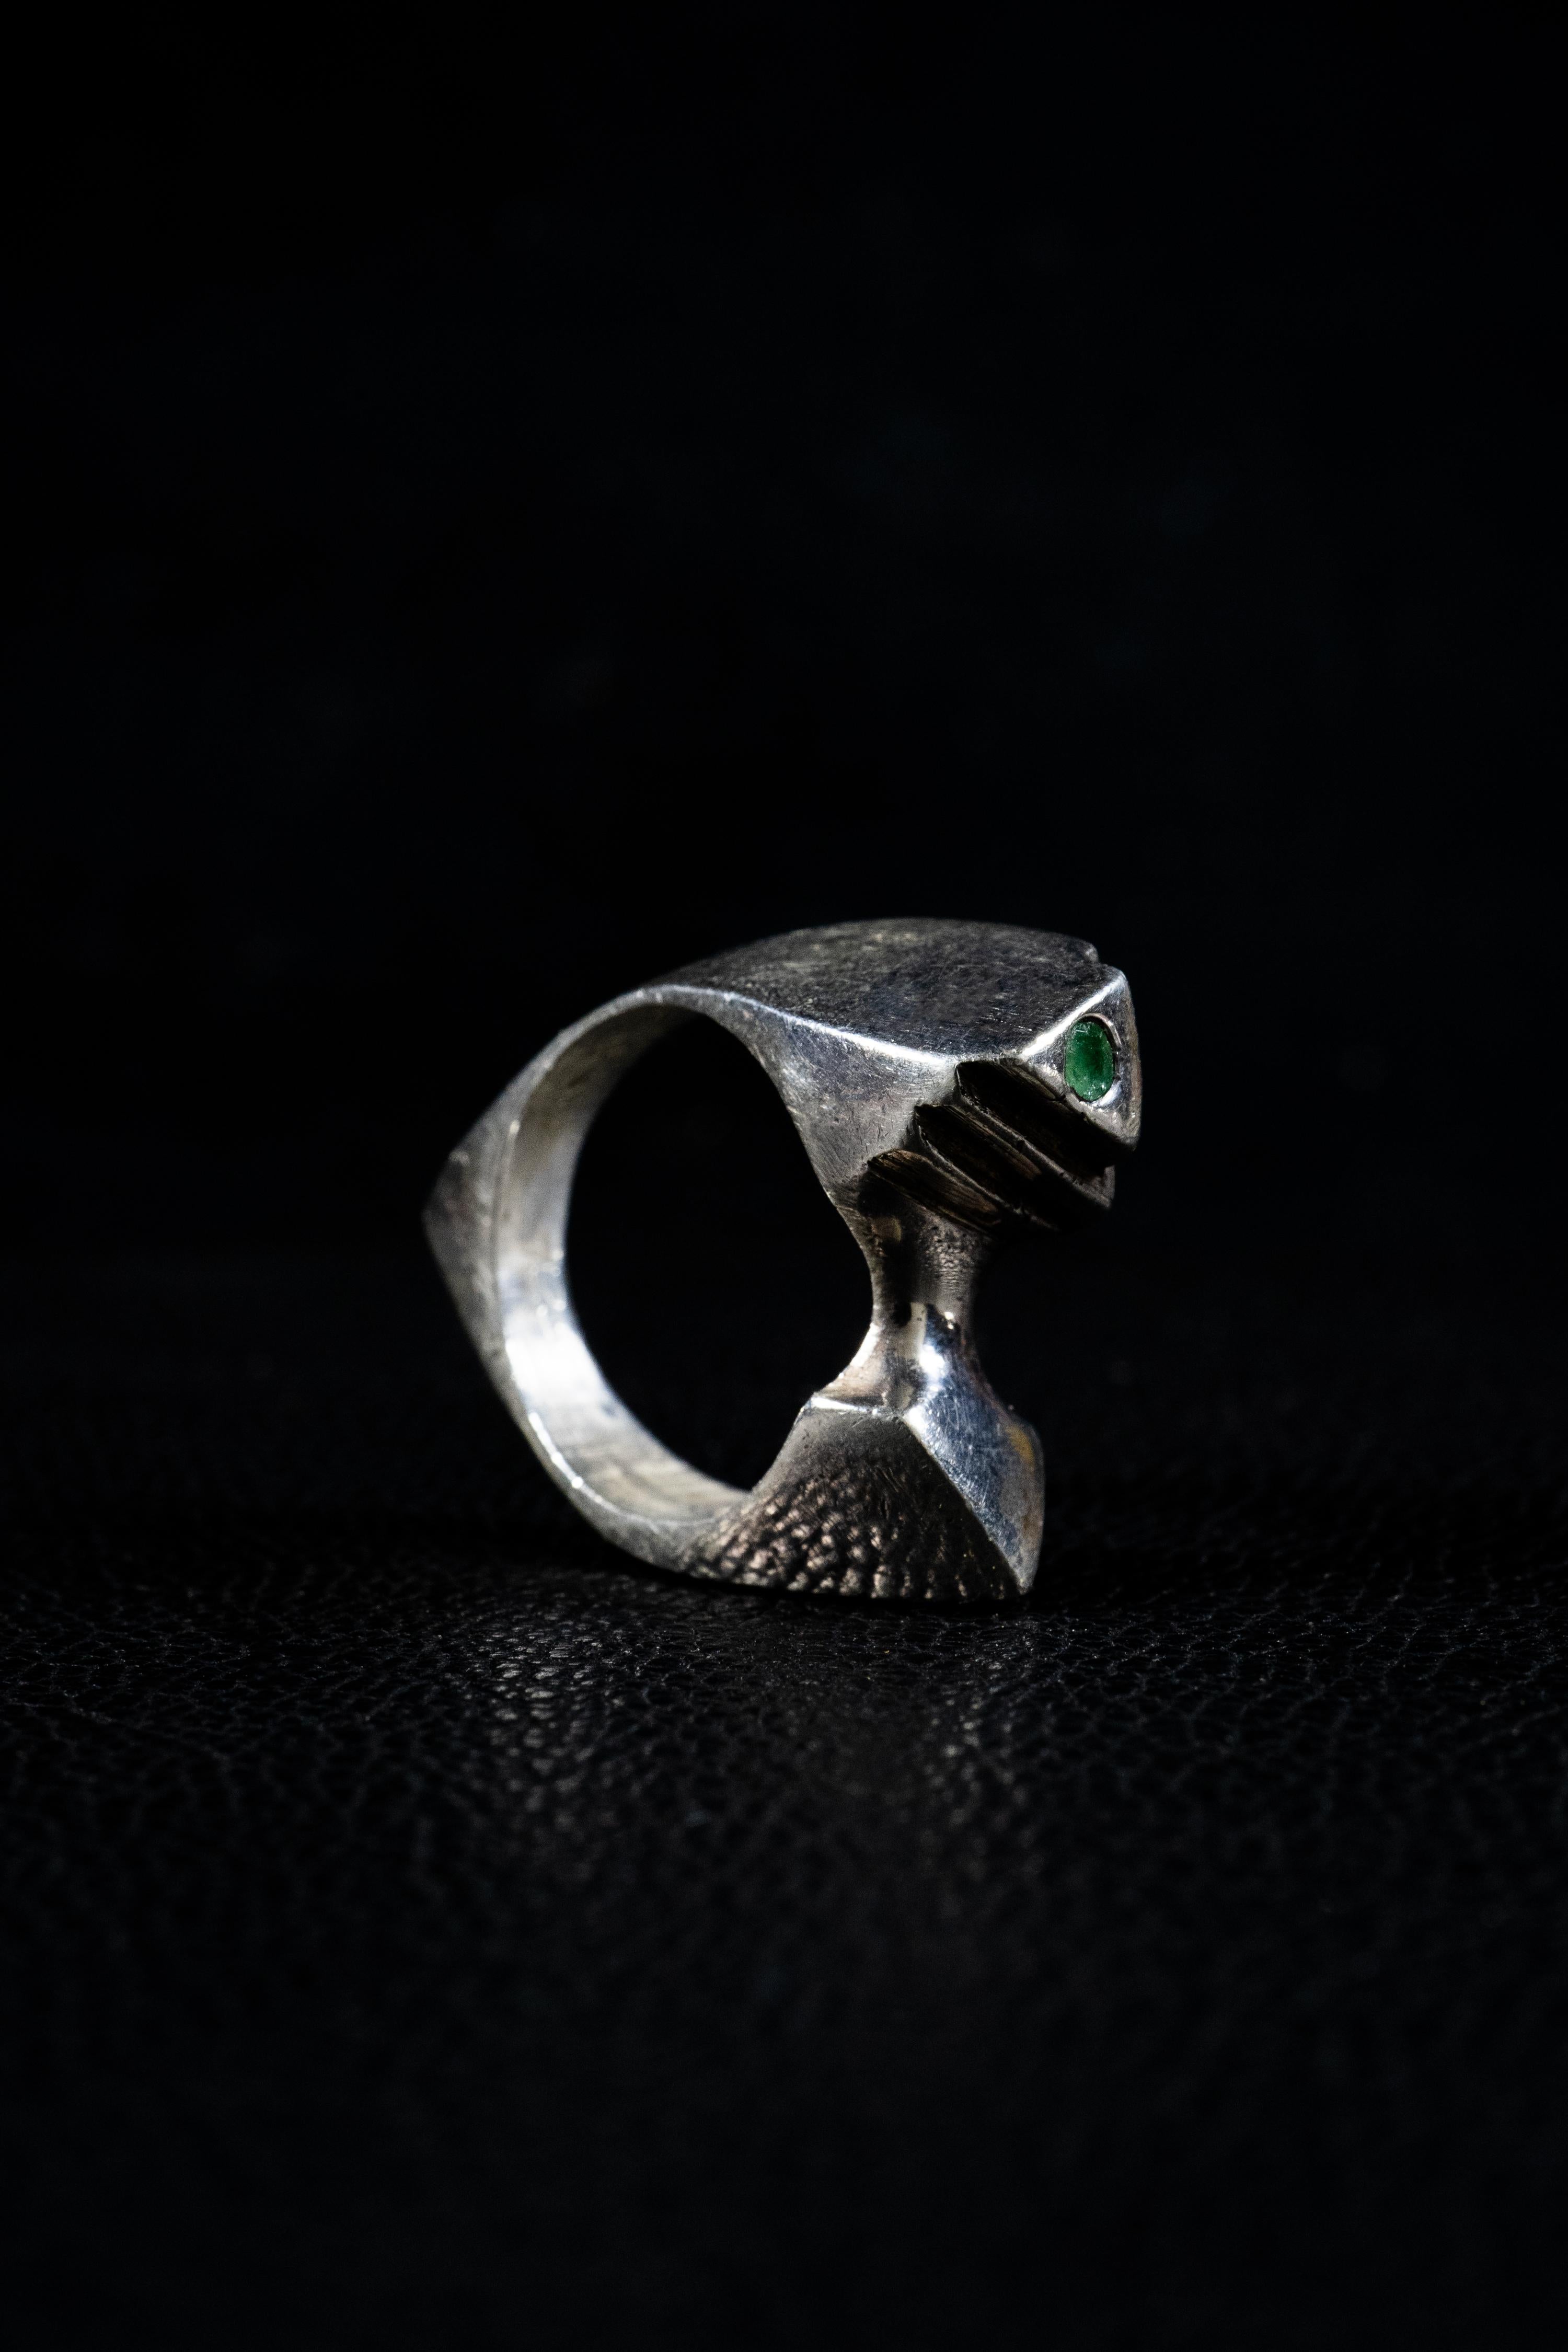 Pyramid is a handcrafted ring by Ken Fury that is hand-carved and cast. The ring showcases the intricate design of a pyramid that interconnects at multiple angles around the ring with a Genuine Emerald stone at the top.

Available in 14K Solid White